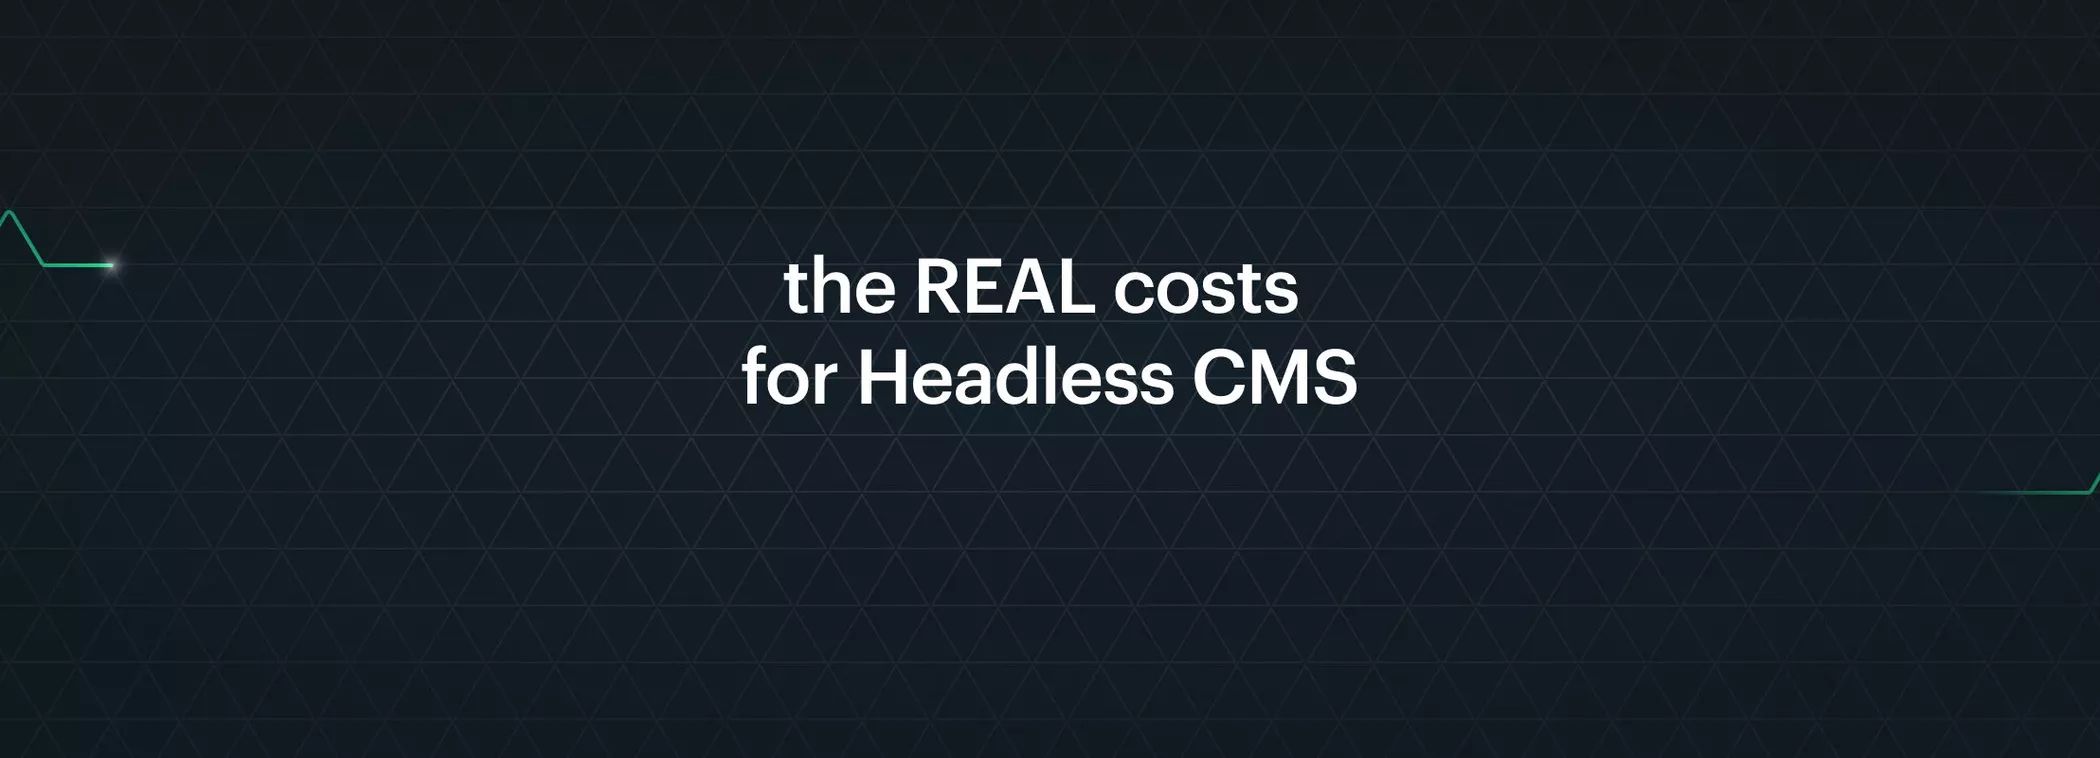 costs for headless cms